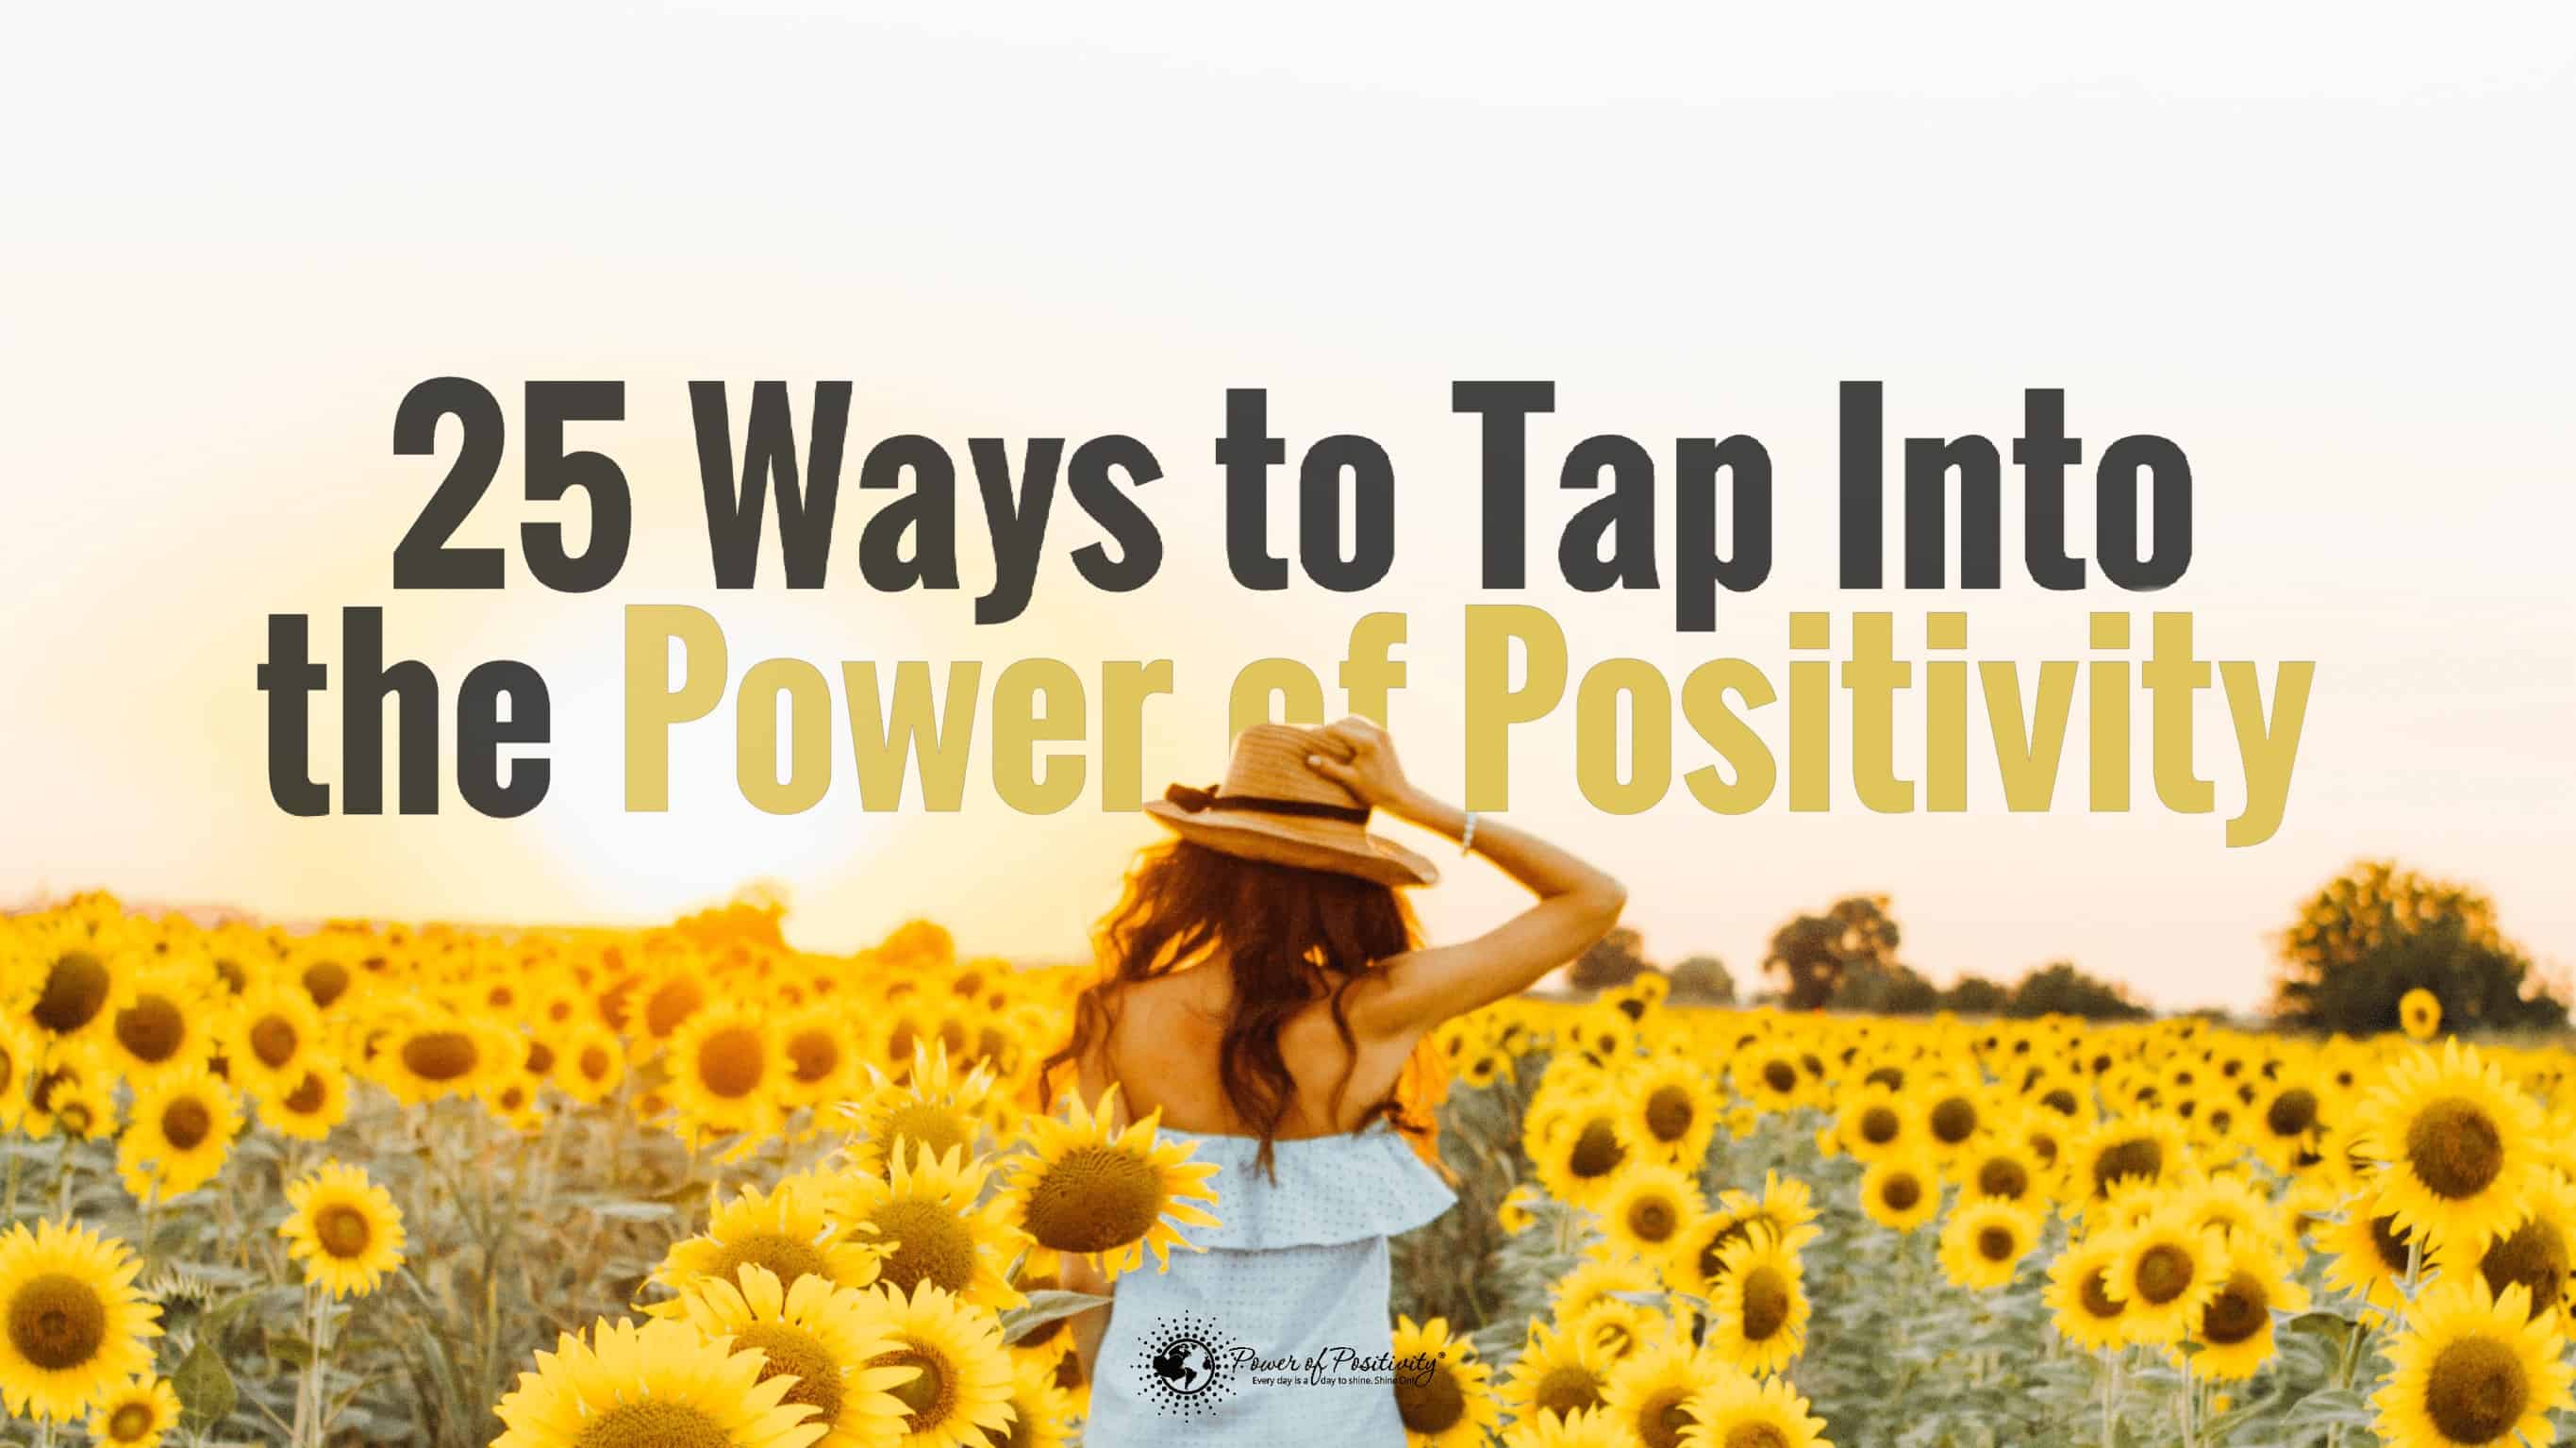 25 Ways to Tap Into the Power of Positivity